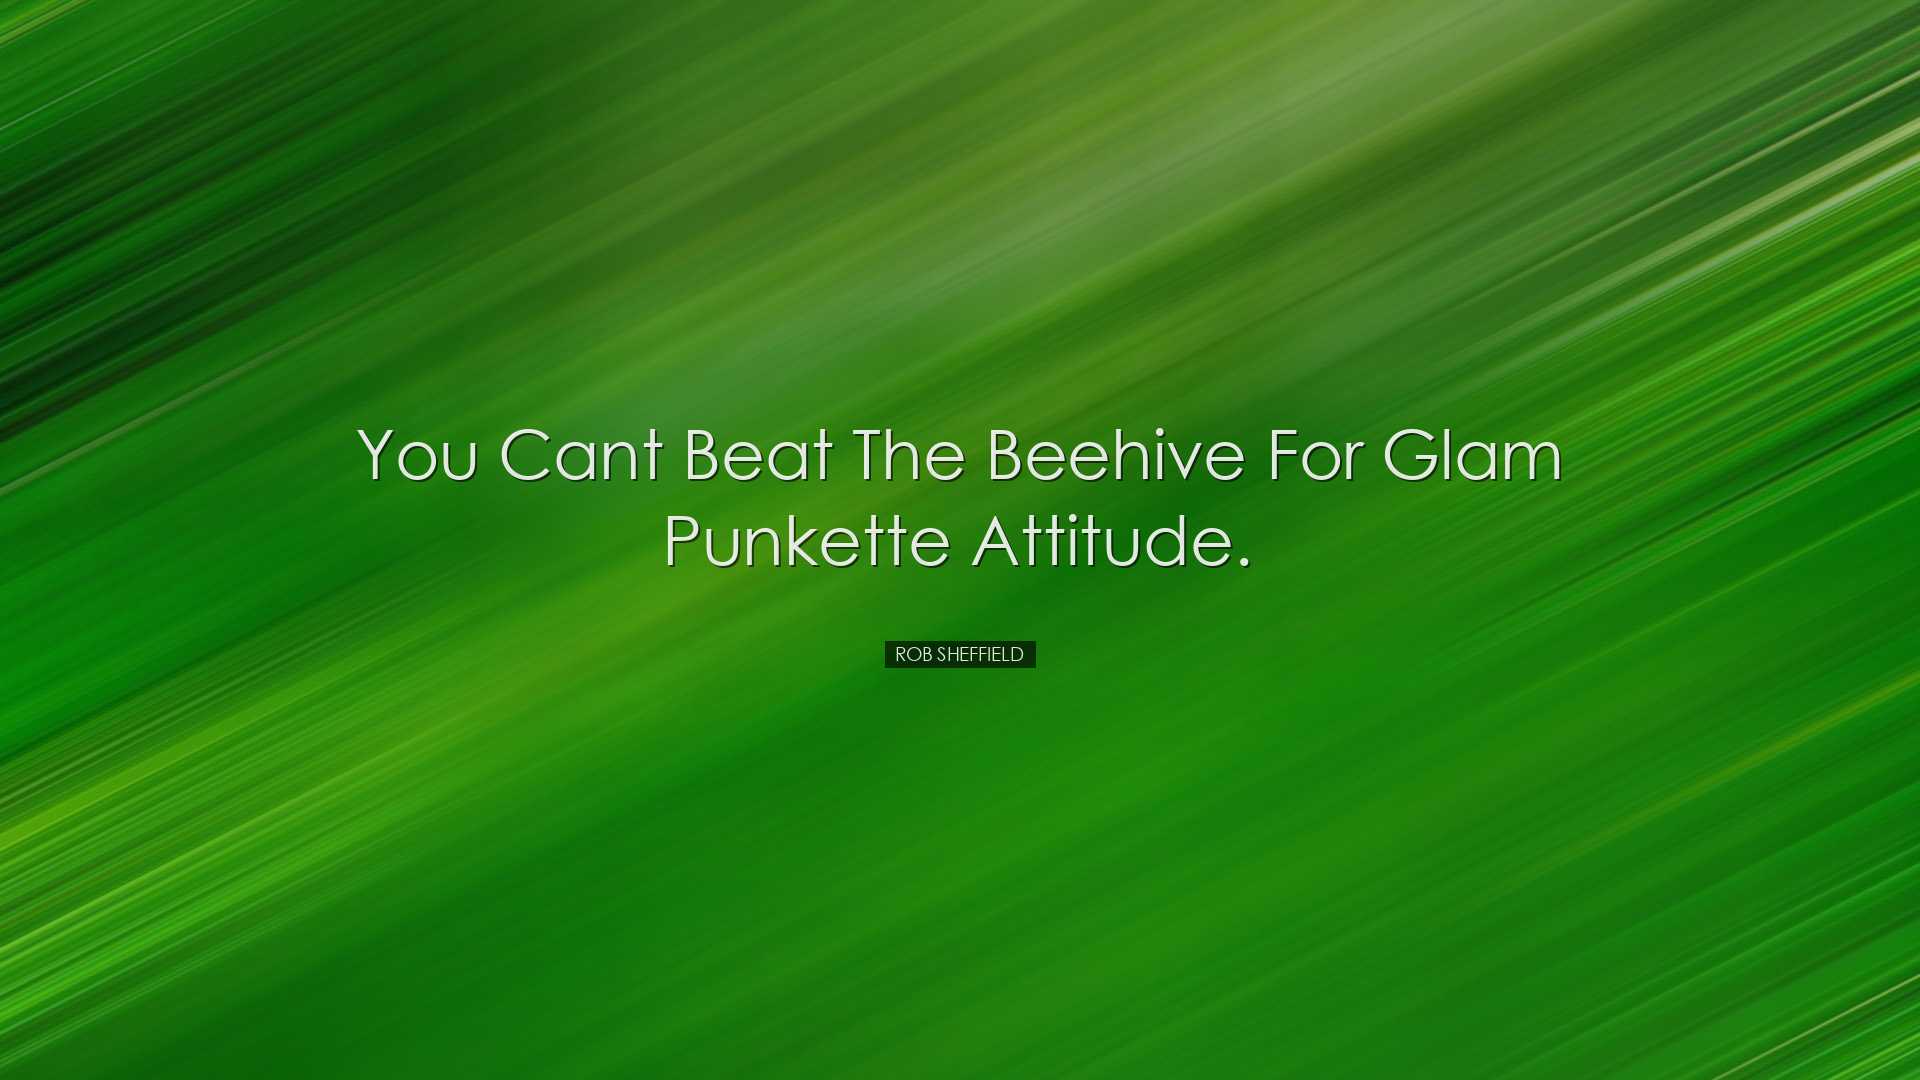 You cant beat the beehive for glam punkette attitude. - Rob Sheffi